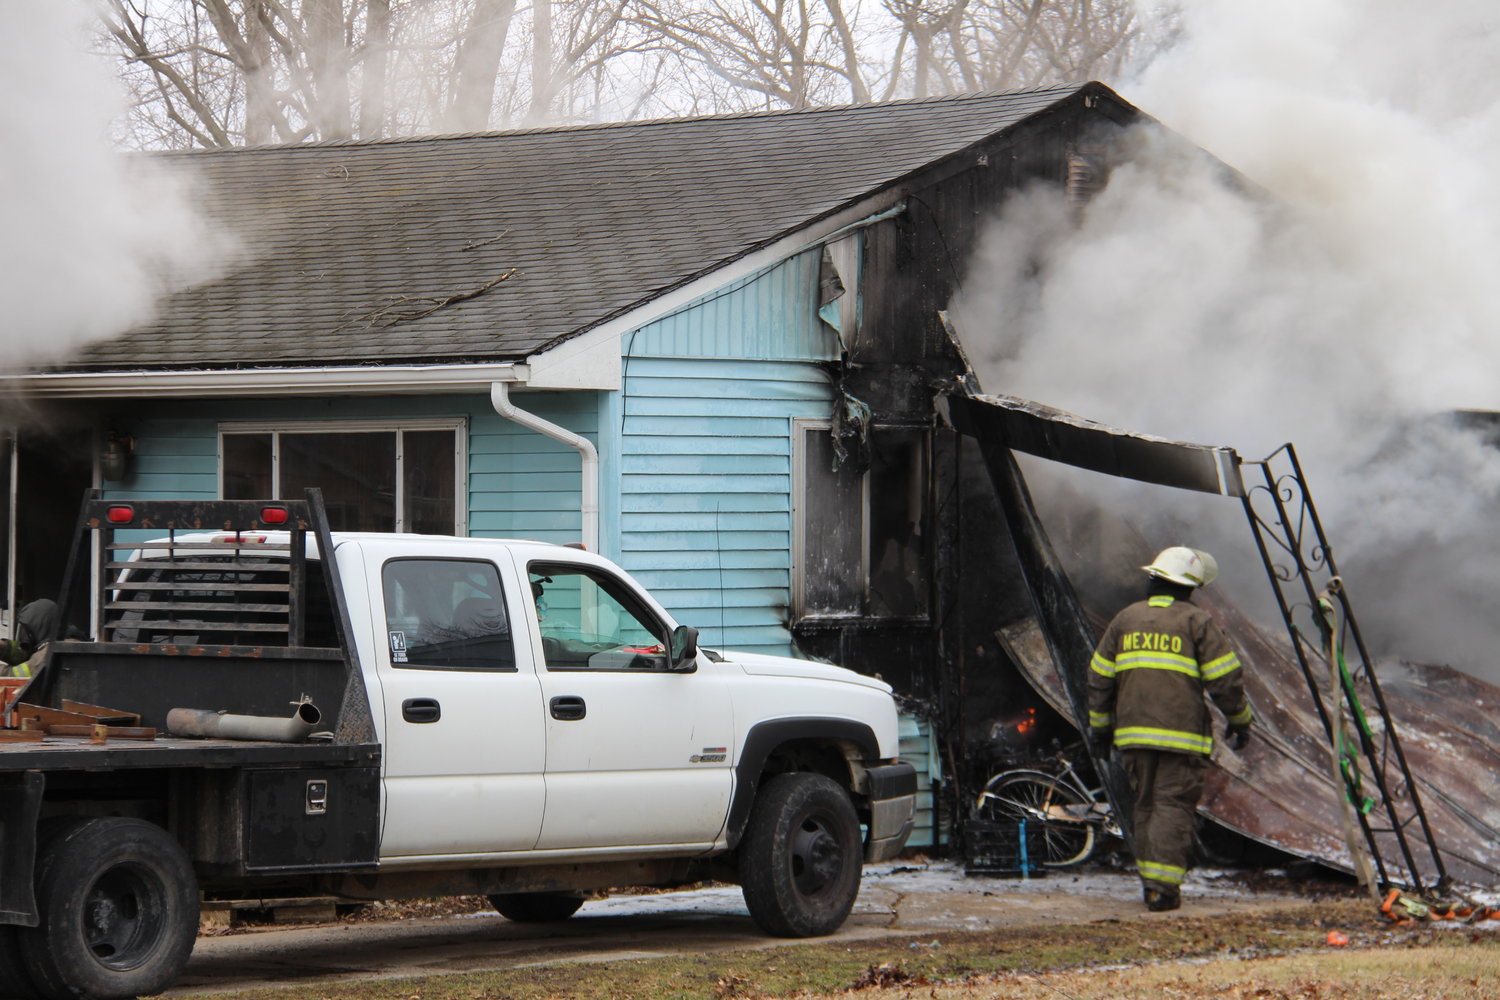 The home’s carport sustained significant damage, where the fire may have started. [Nathan Lilley Photo]